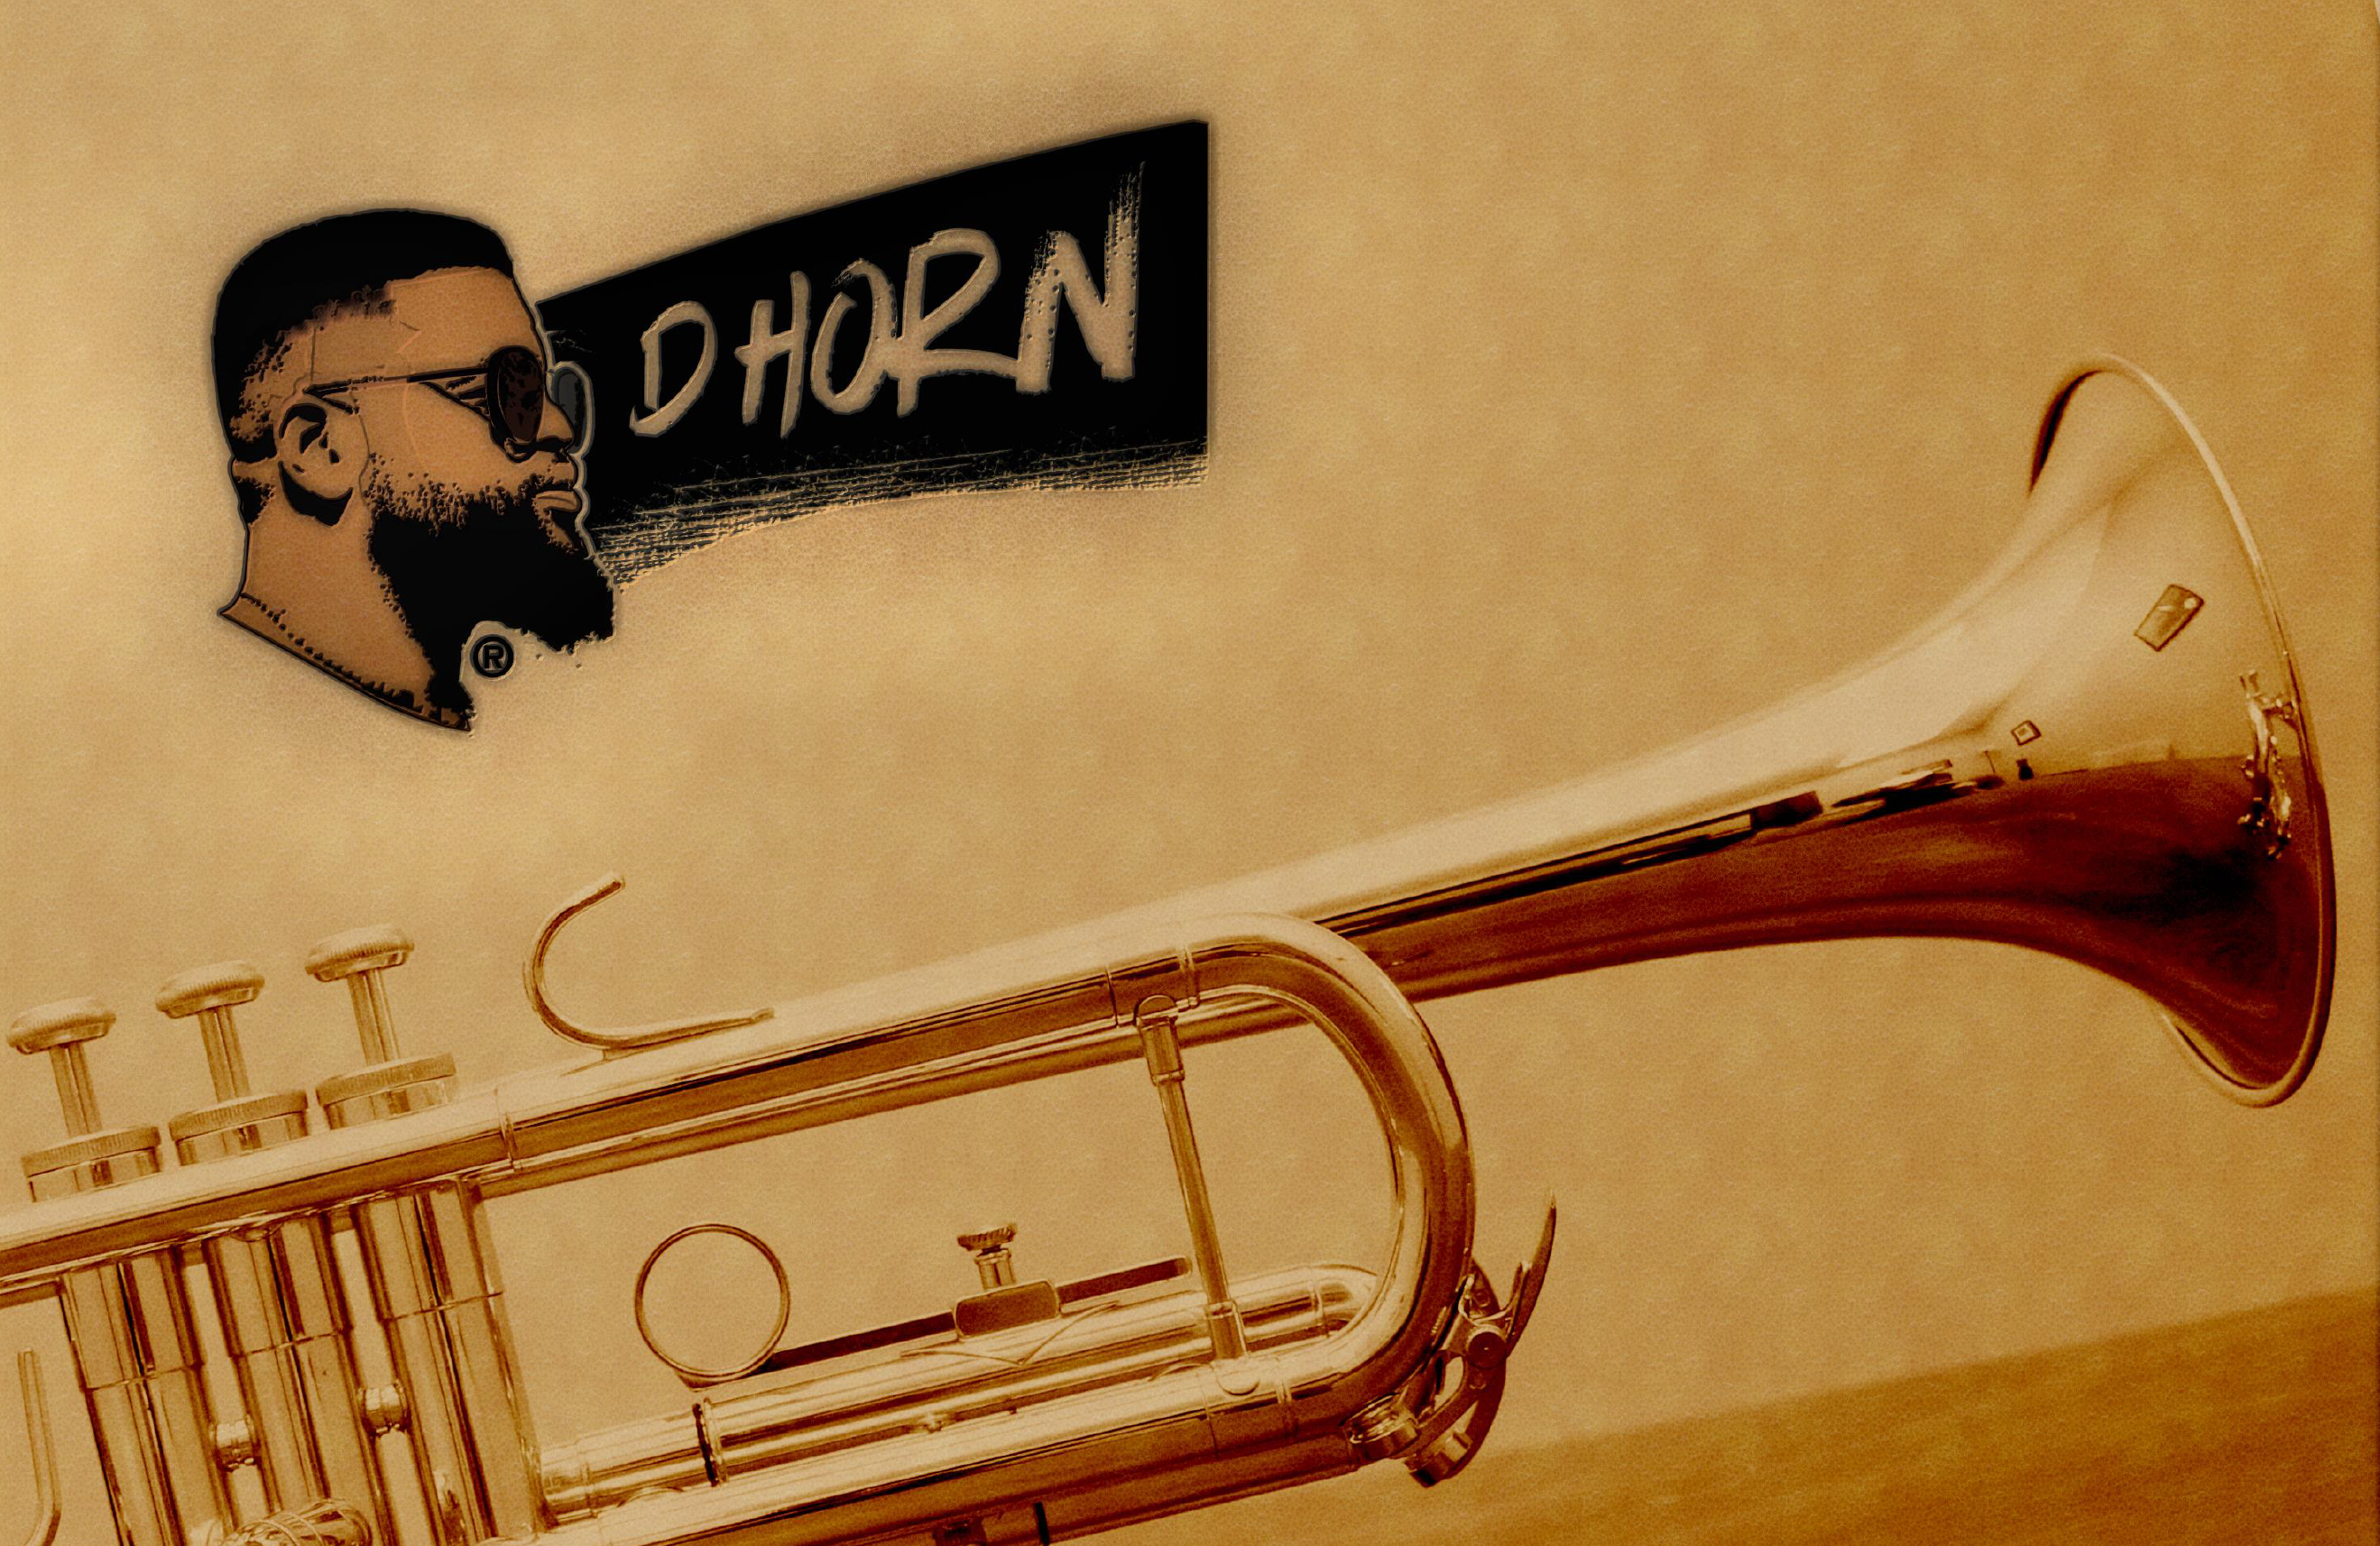 D Horn's "Elisa" now available on digital stores